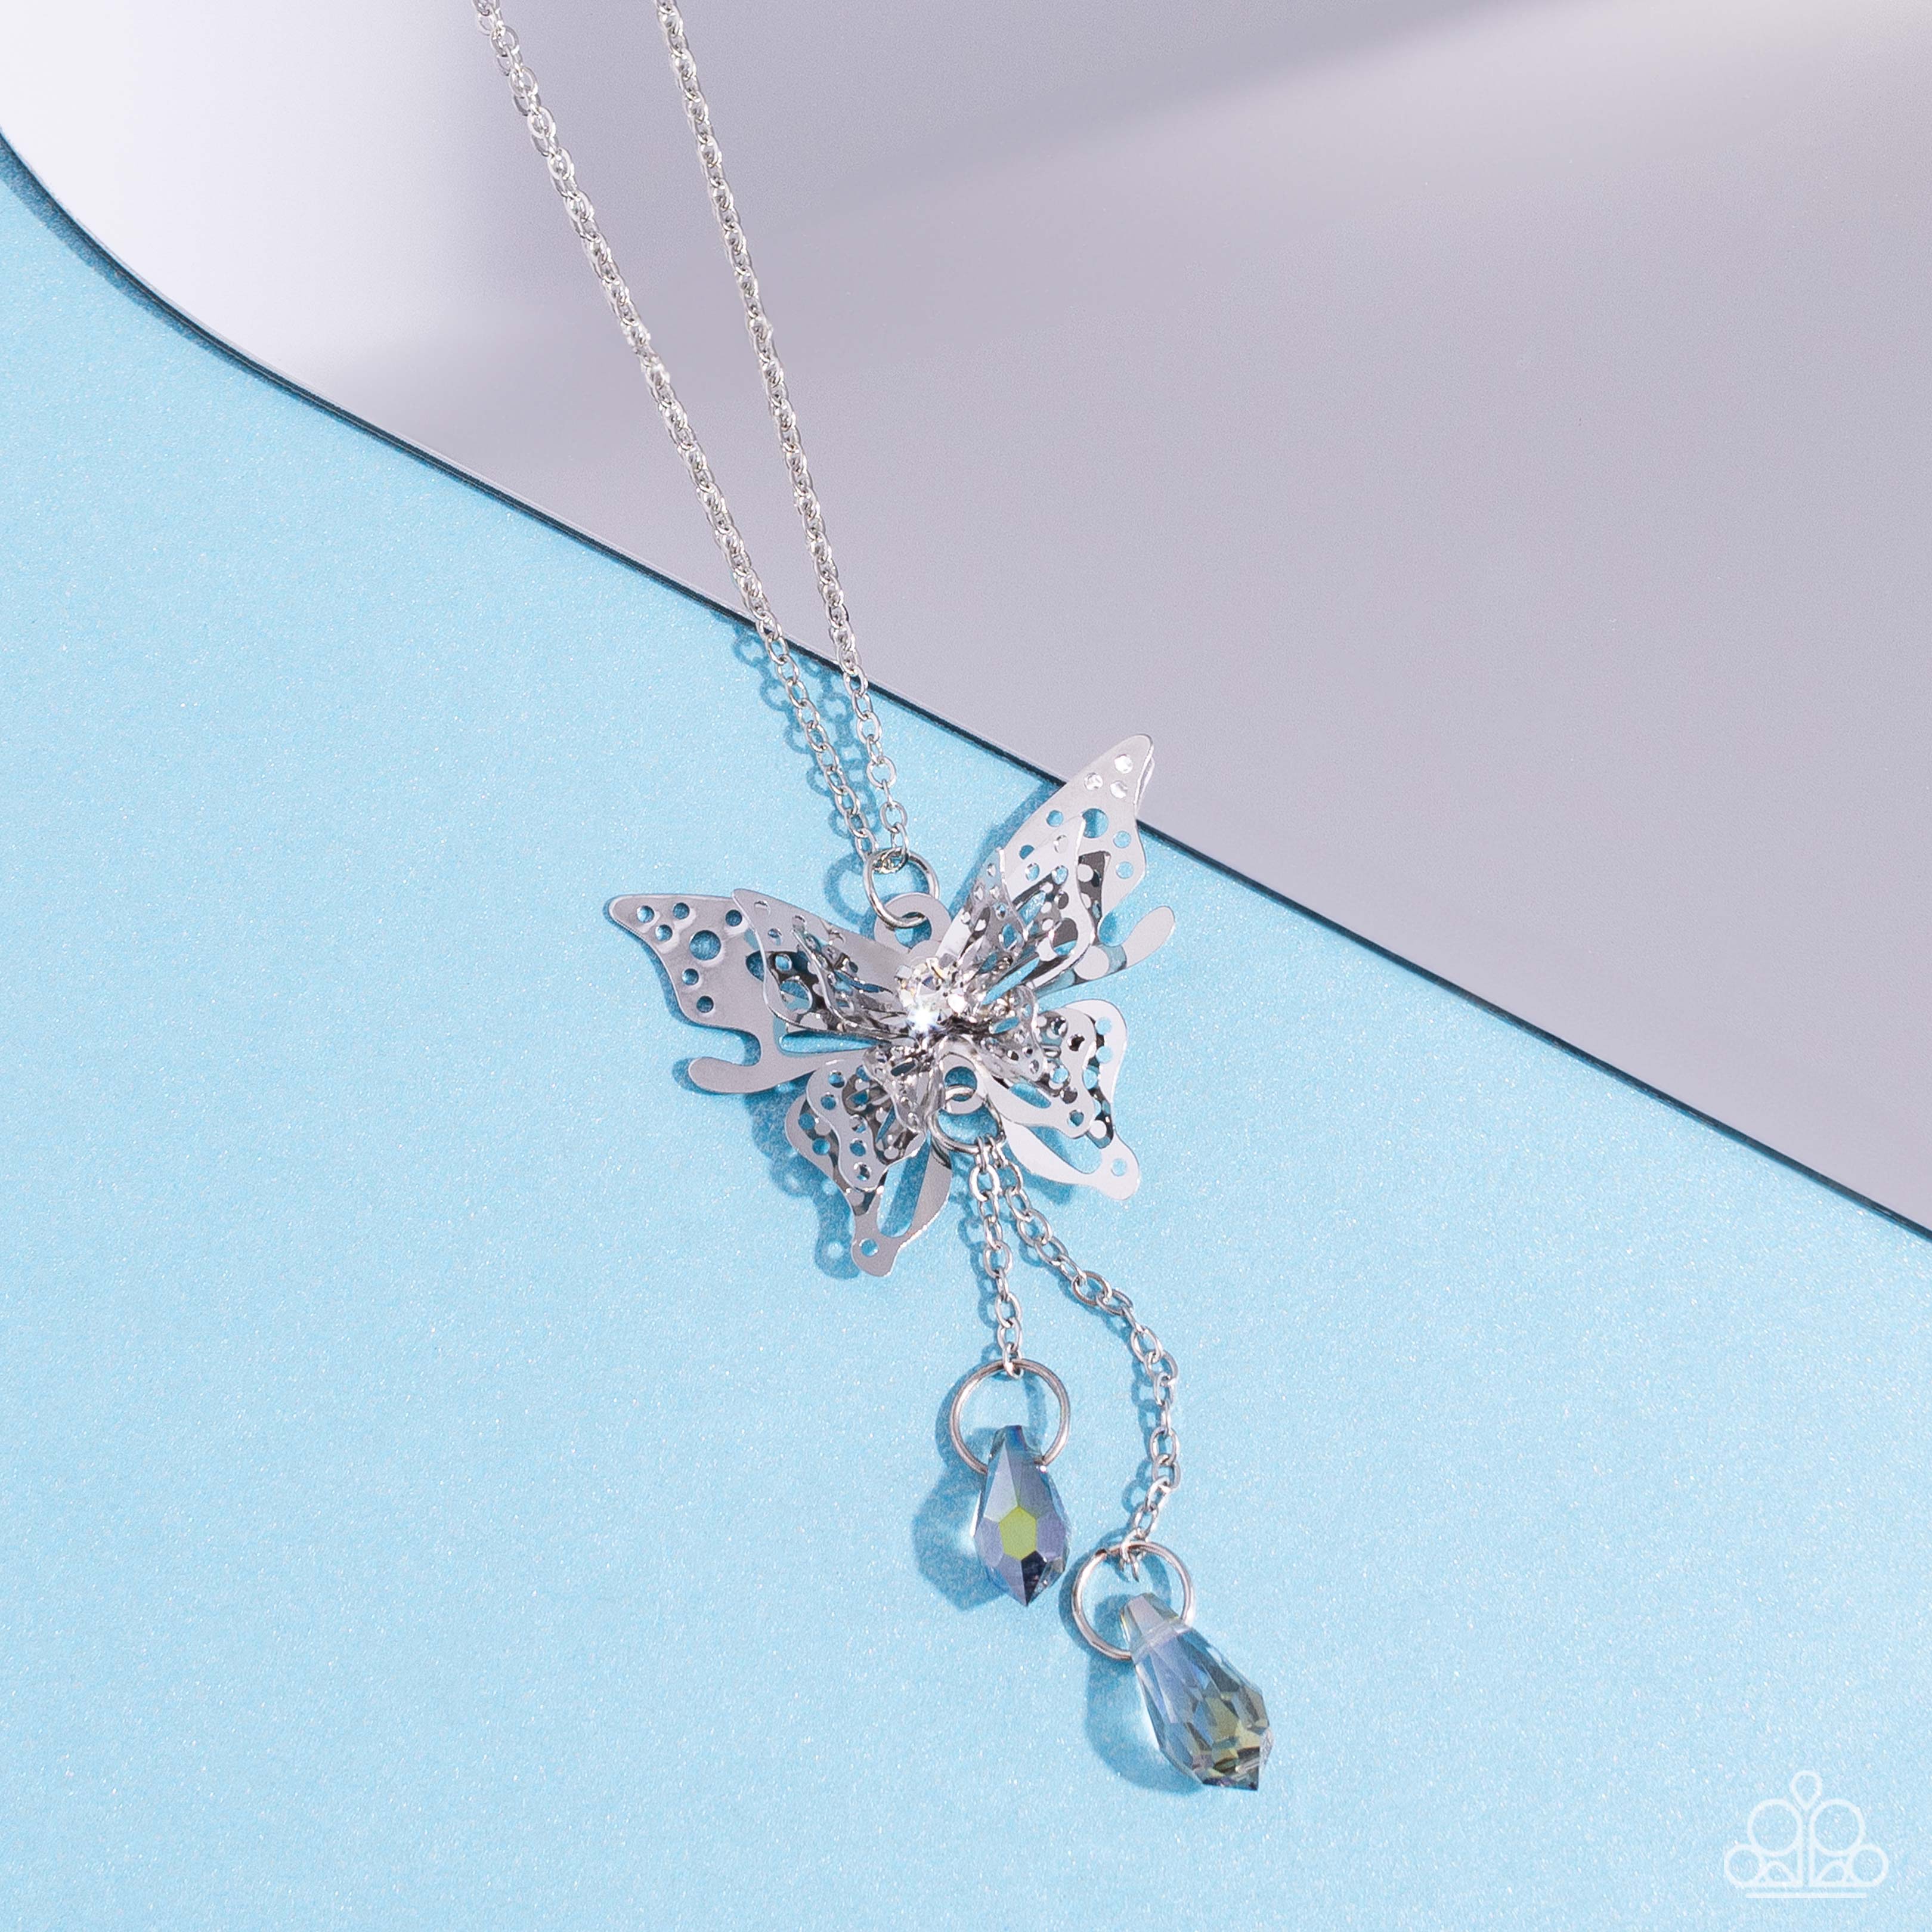 ENCHANTED WINGS SILVER-NECKLACE